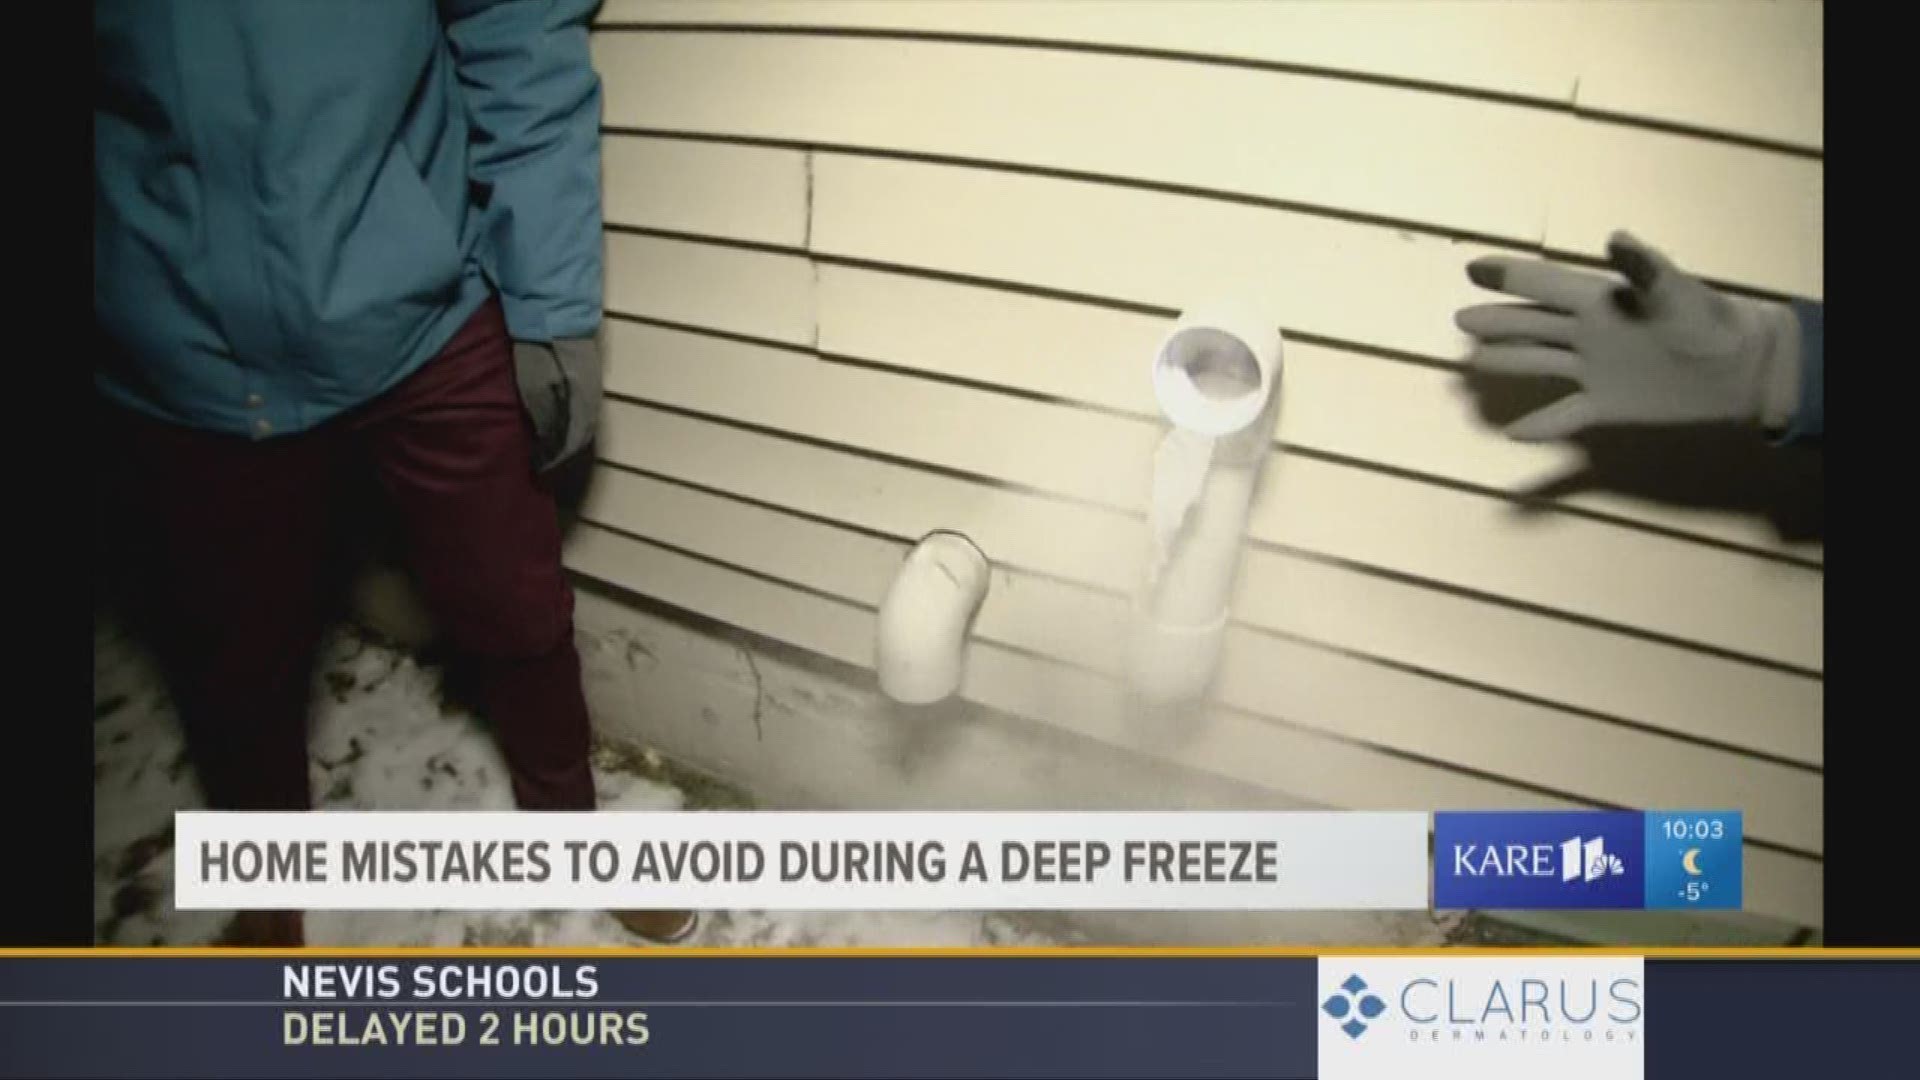 We're no strangers to this bitter cold in the Bold North. But there are some things you need to remember about protecting your home during weather like this. Kent Erdahl caught up with a repairman who shares three tips to remember during a deep freeze.